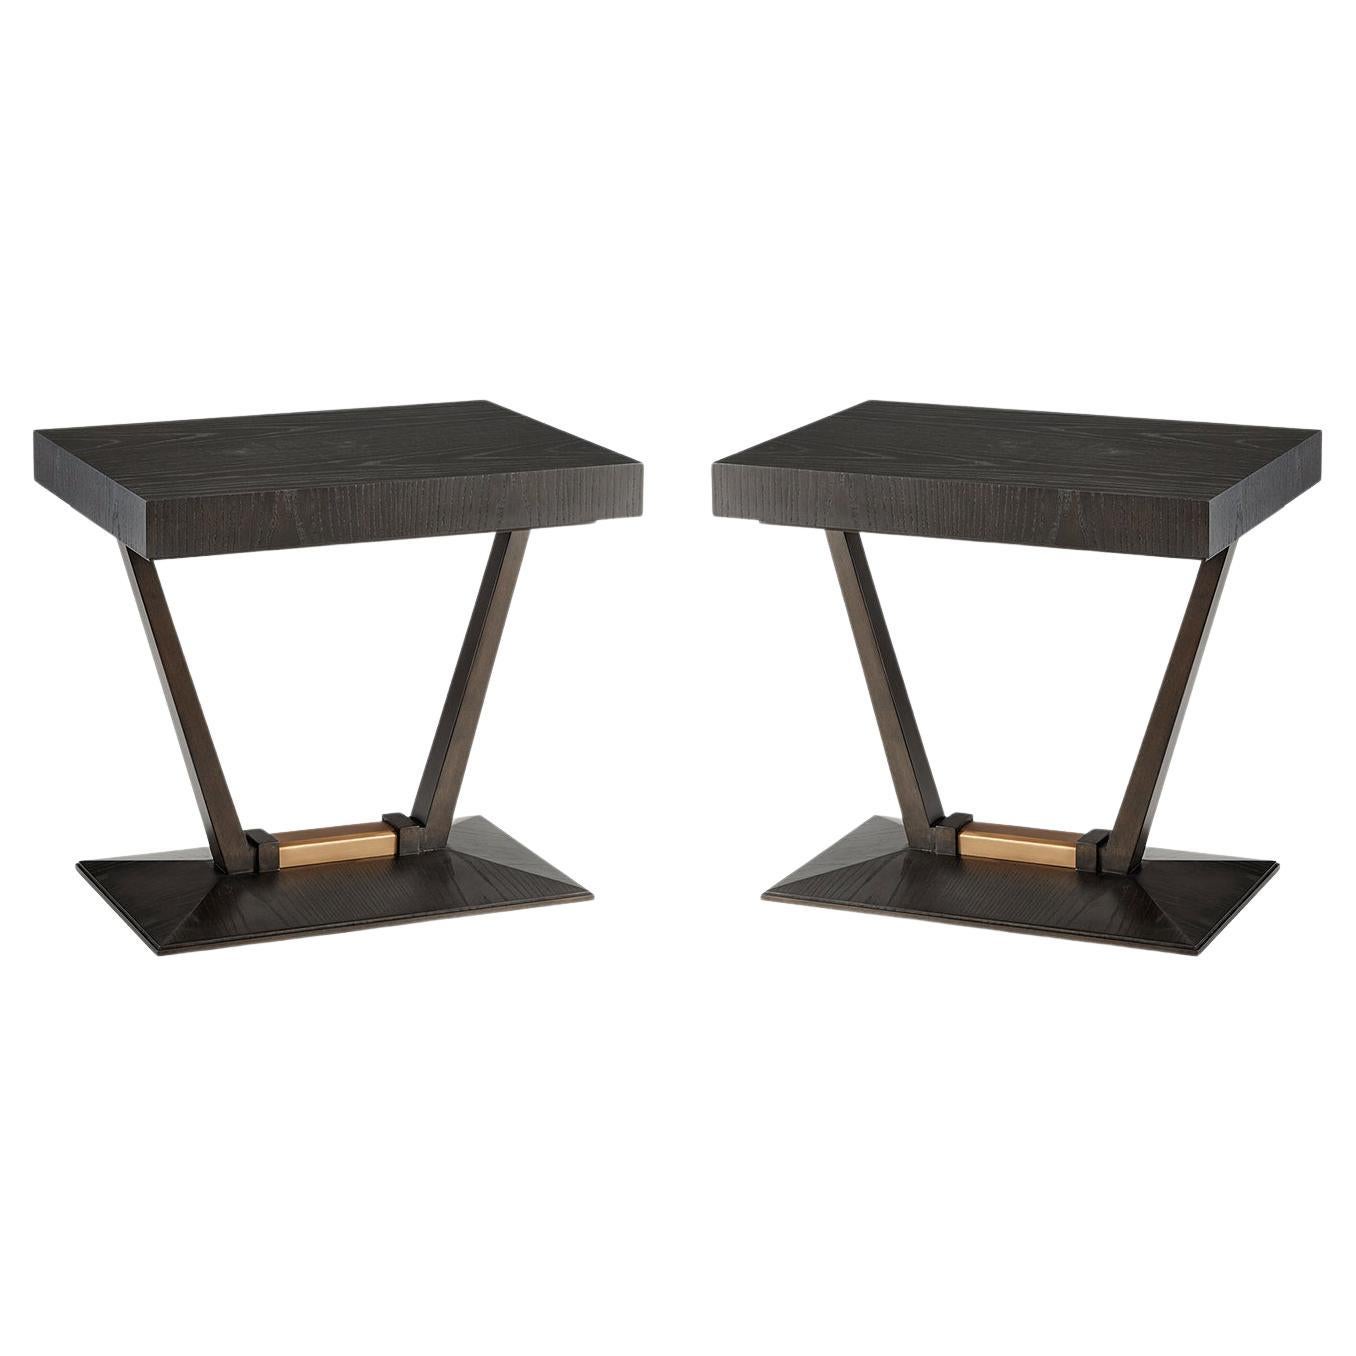 Pair of Art Deco Bevelled Side Tables